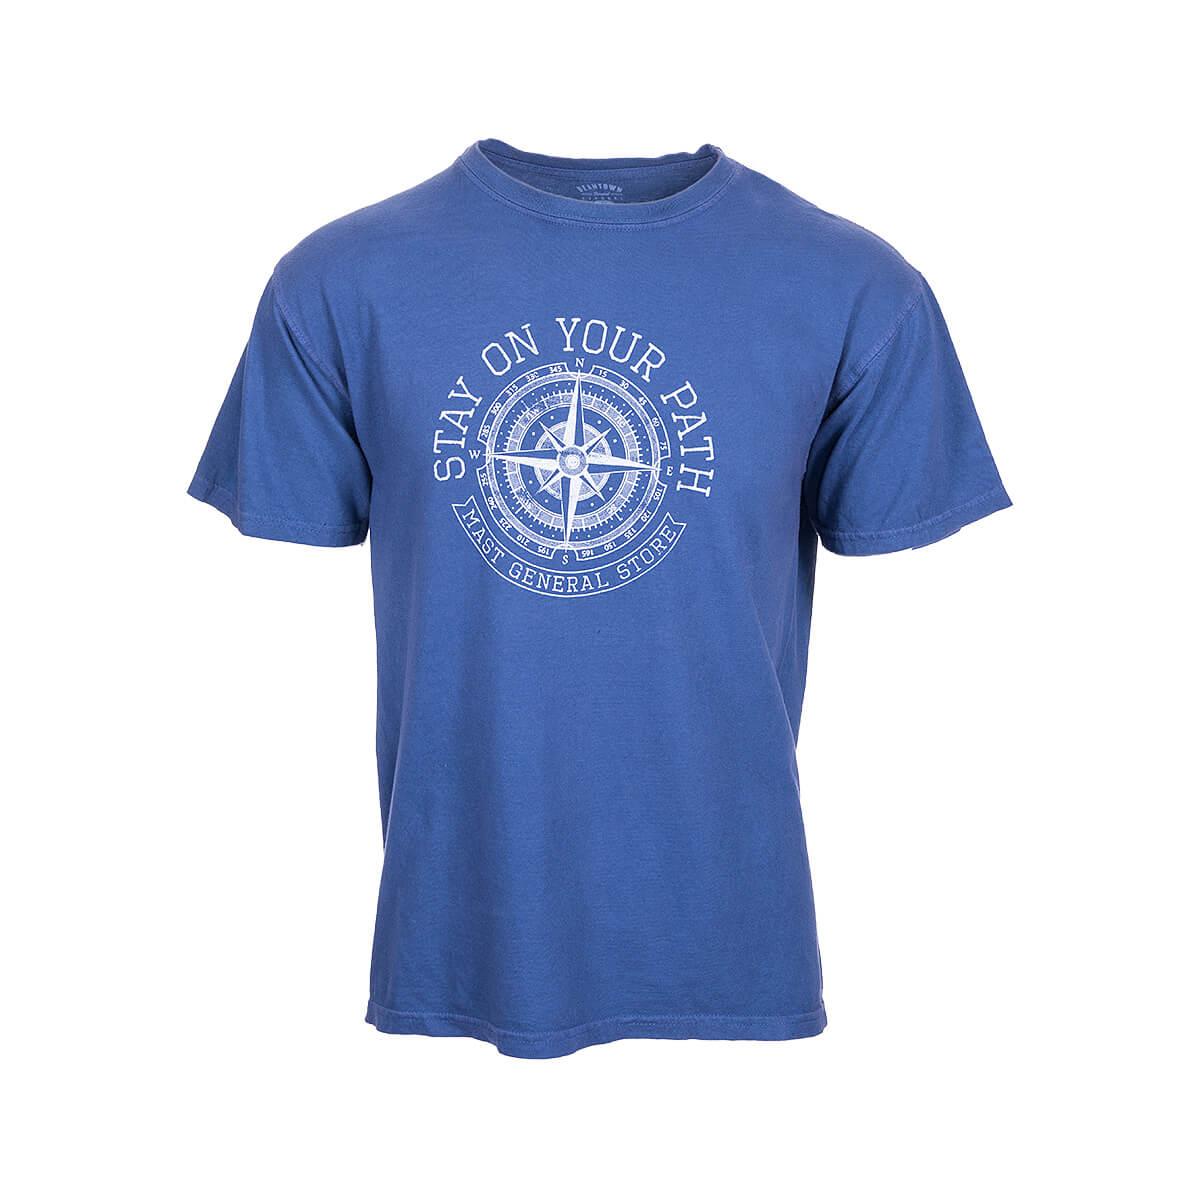  Mast General Store Stay On Your Path Short Sleeve T- Shirt